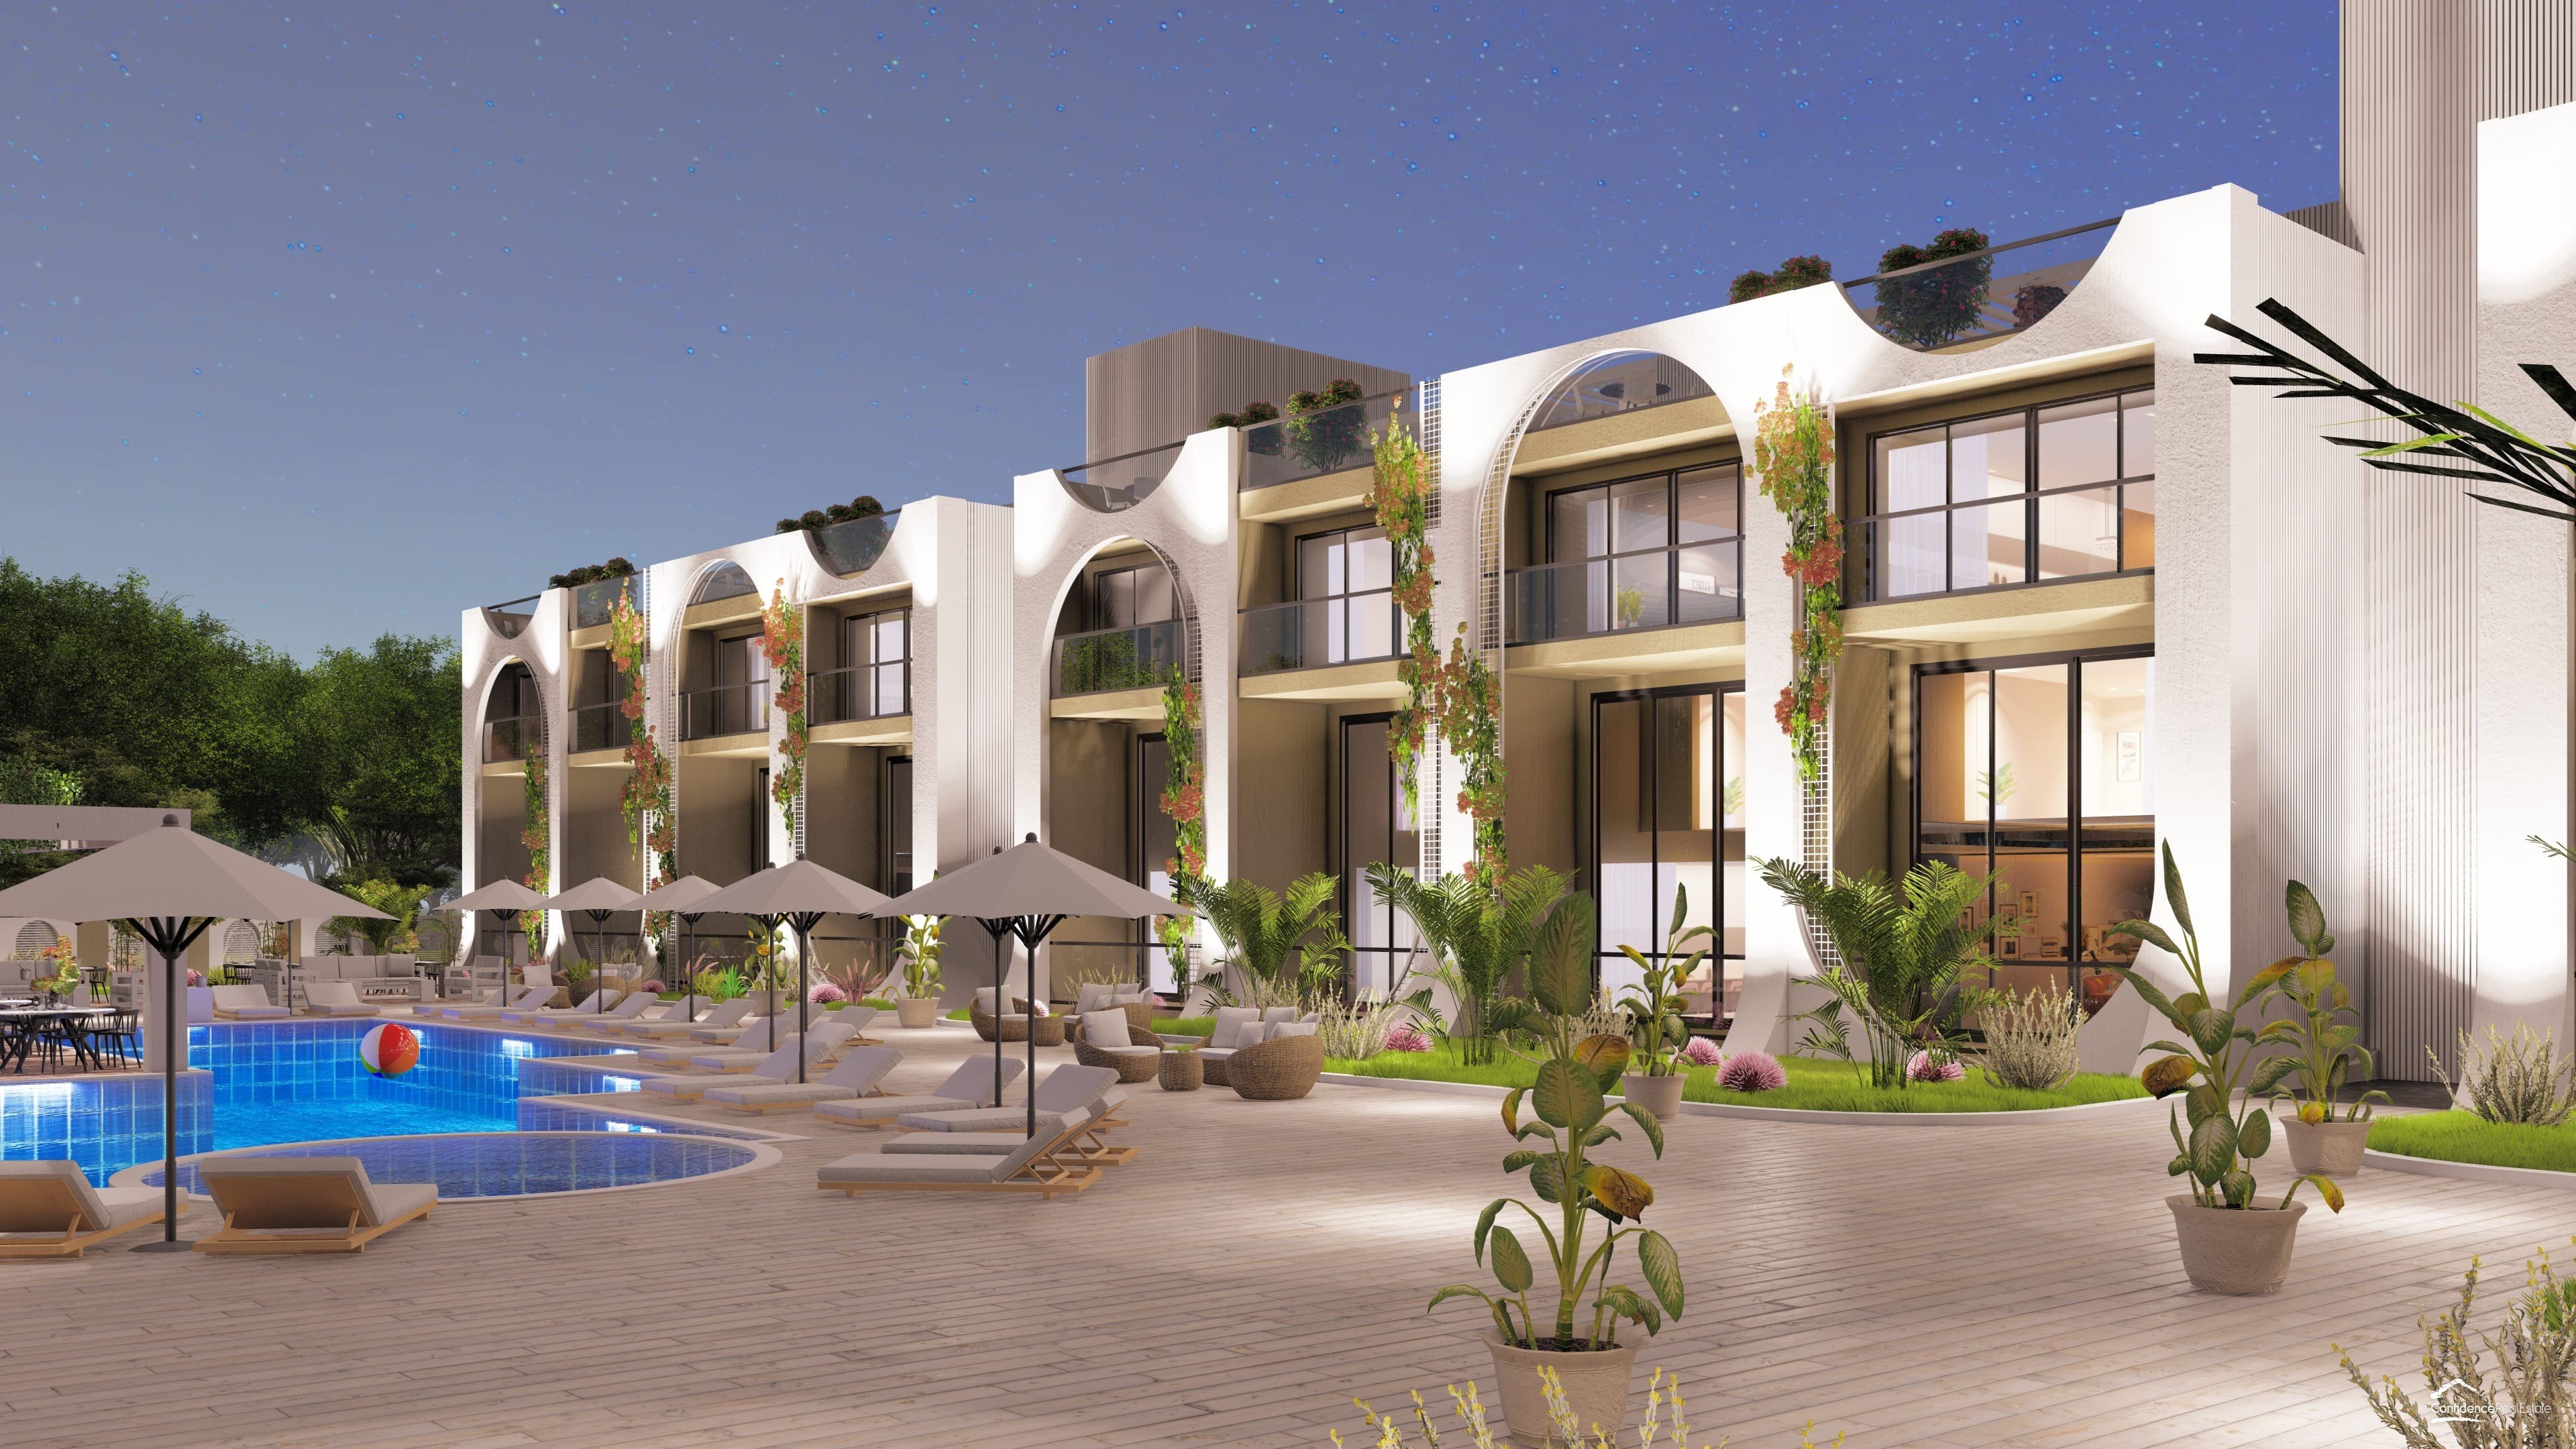 The project of residential apartments with sea and mountain views in Northern Cyprus, Esentepe